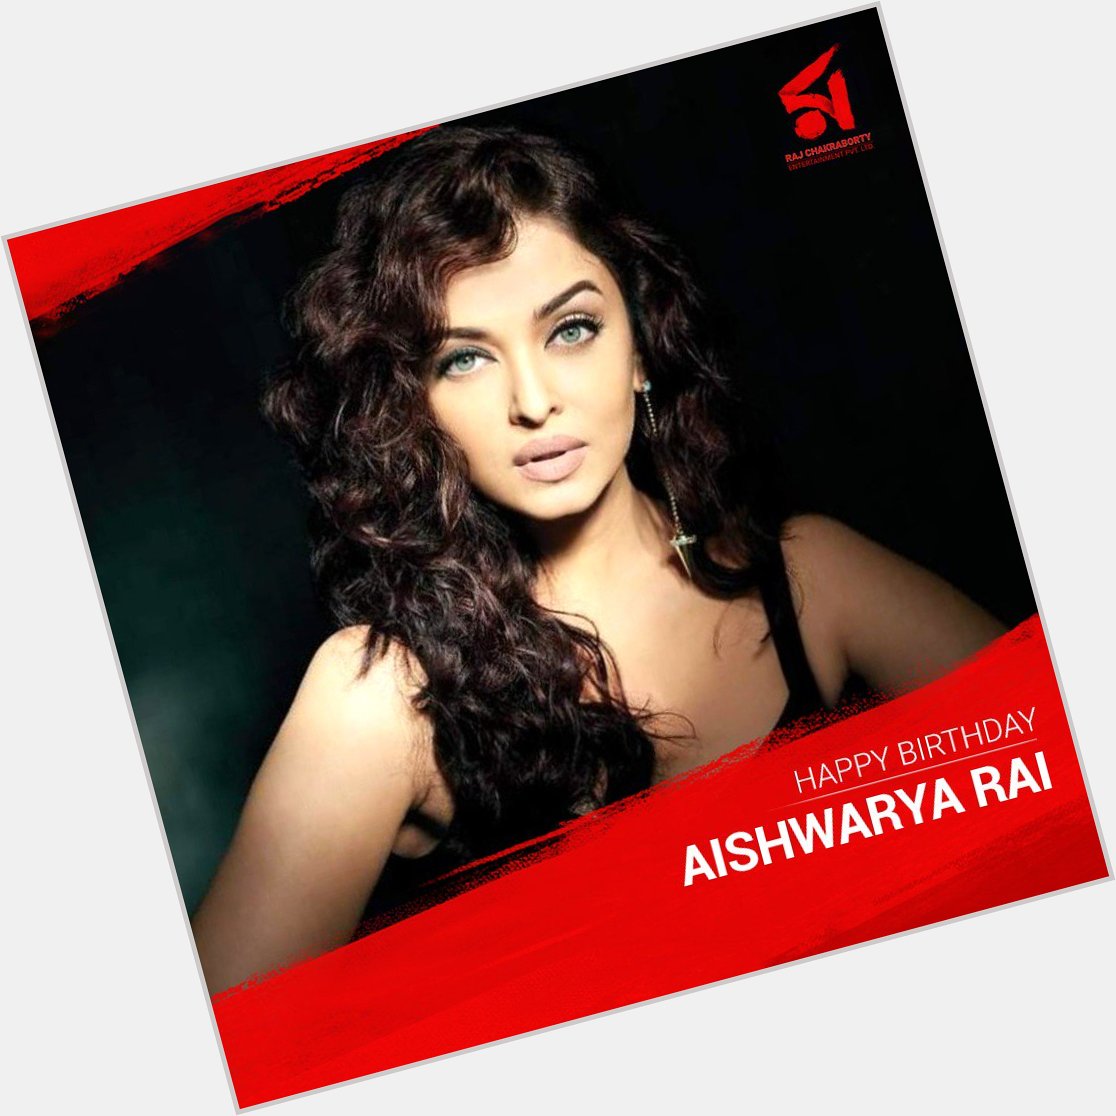 Happy Birthday Aishwarya Rai Bachchan !!!
The entertainment industry bows down to your beauty and talent. 